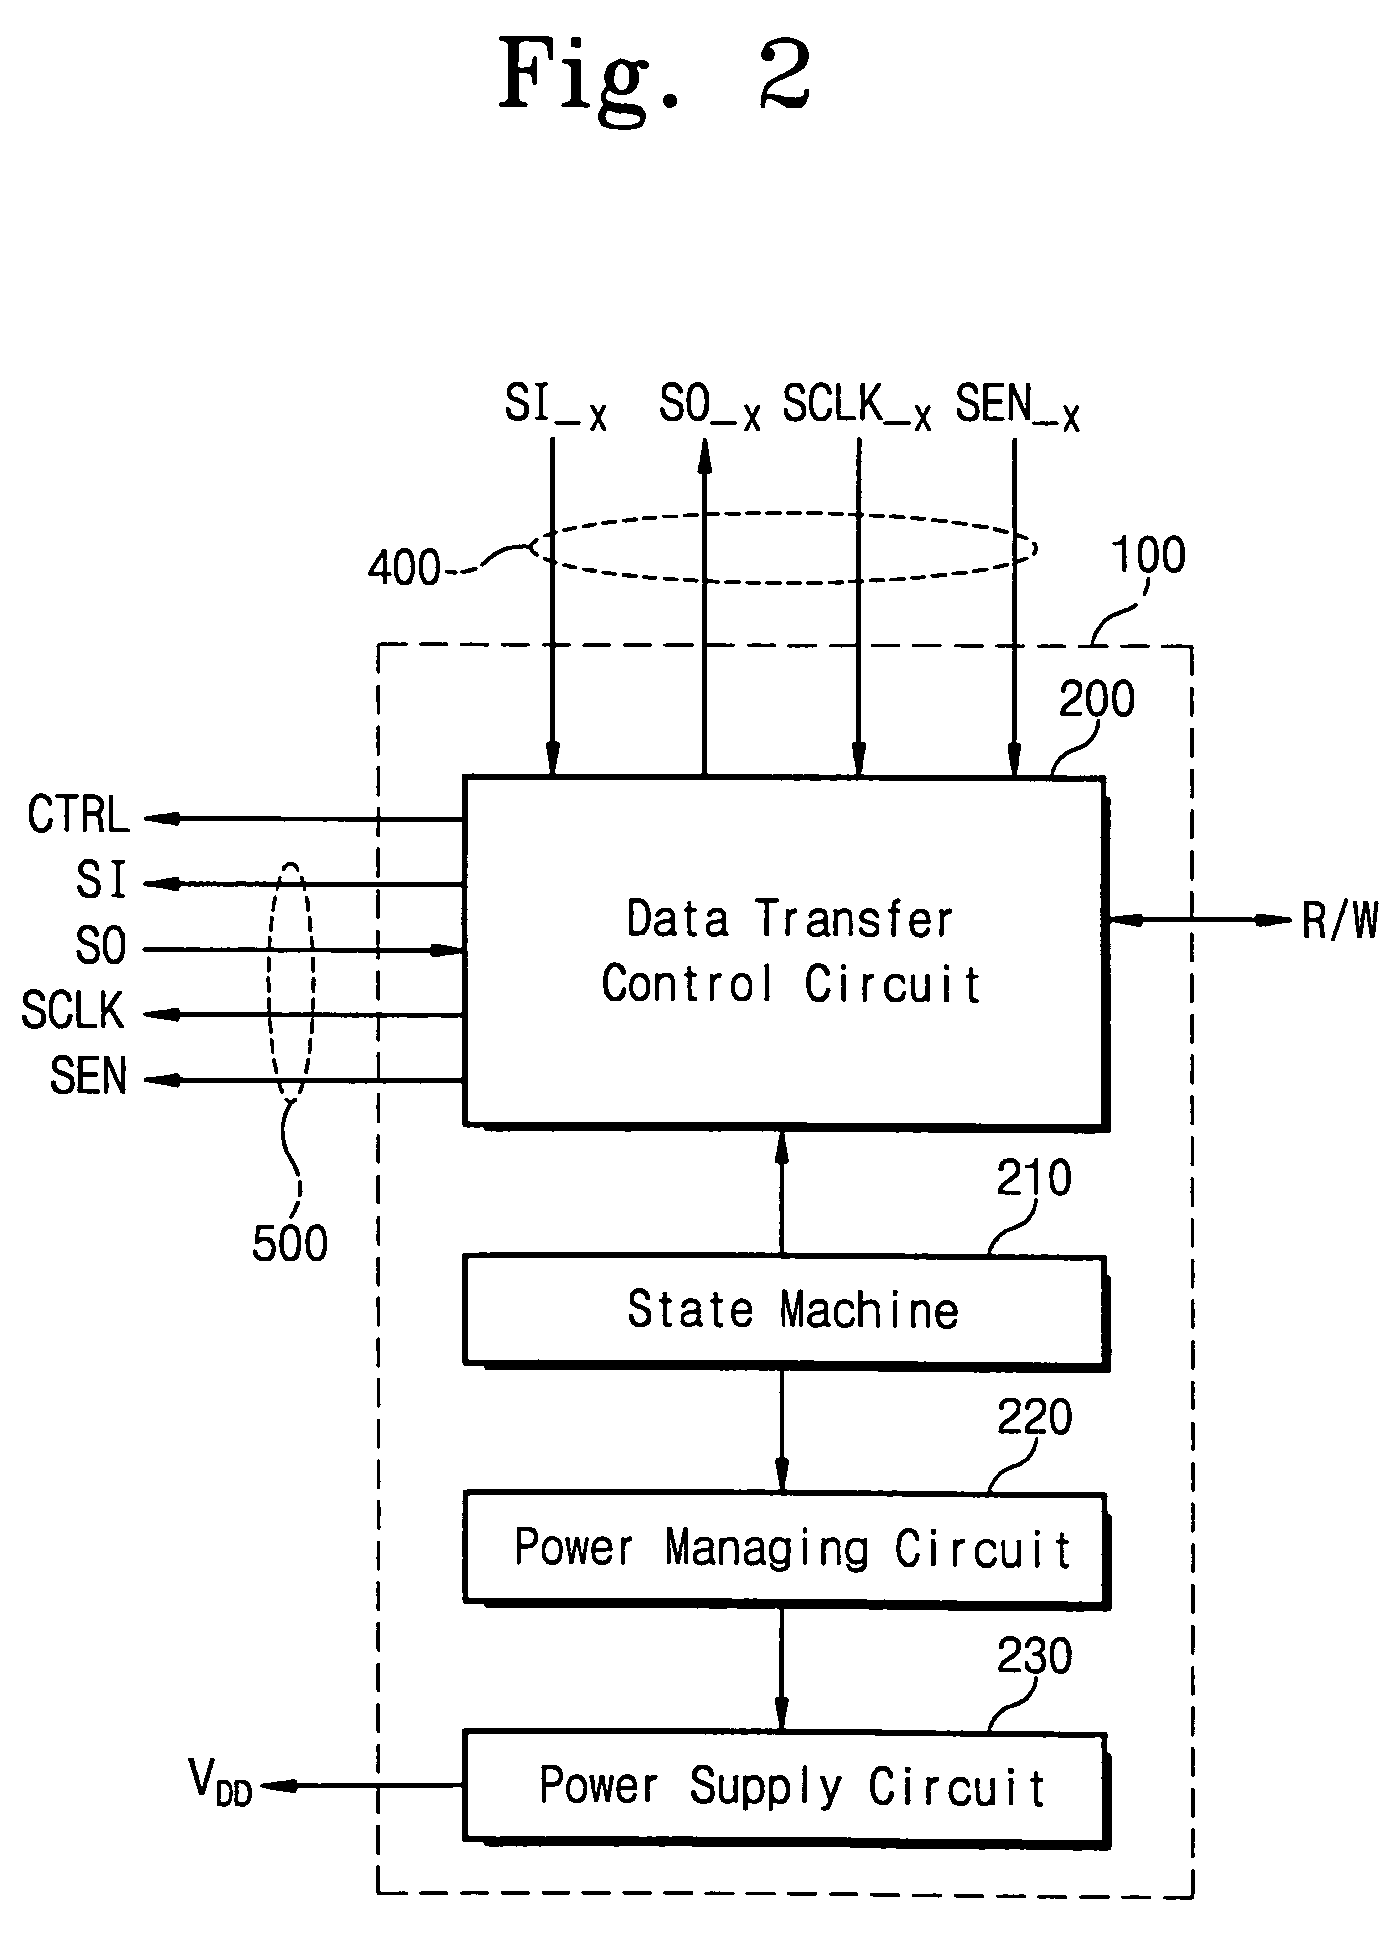 System and apparatus for allowing data of a module in power saving mode to remain accessible